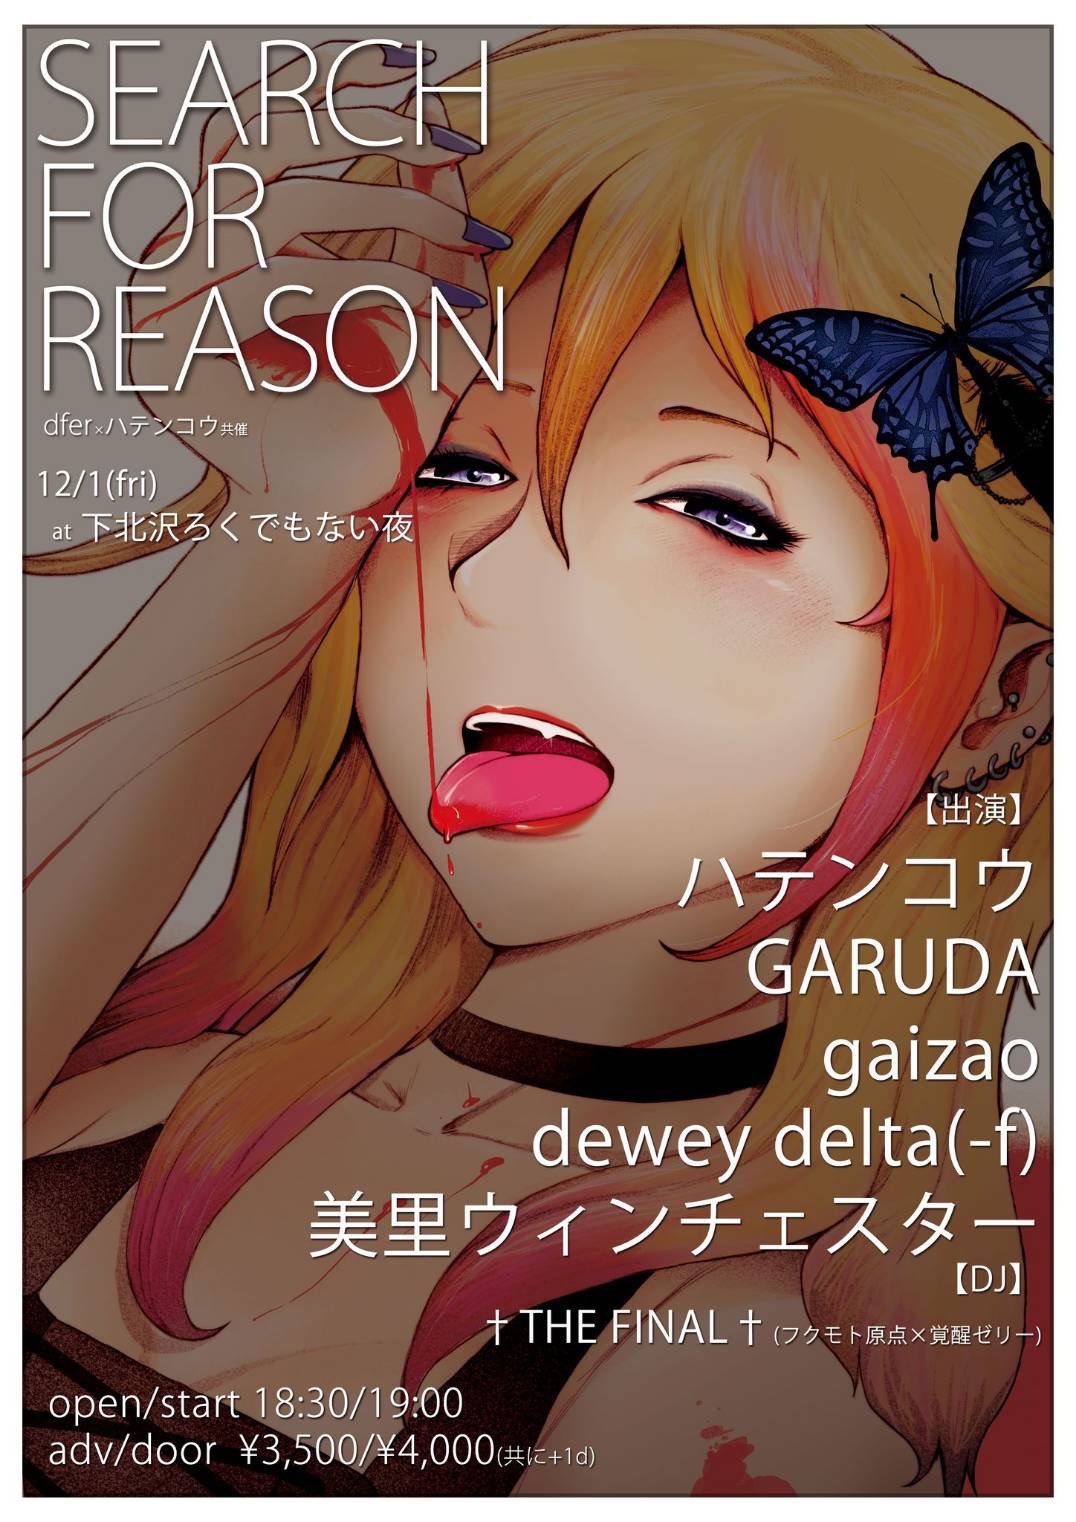 dfer×ハテンコウ共同企画 SEARCH FOR REASON